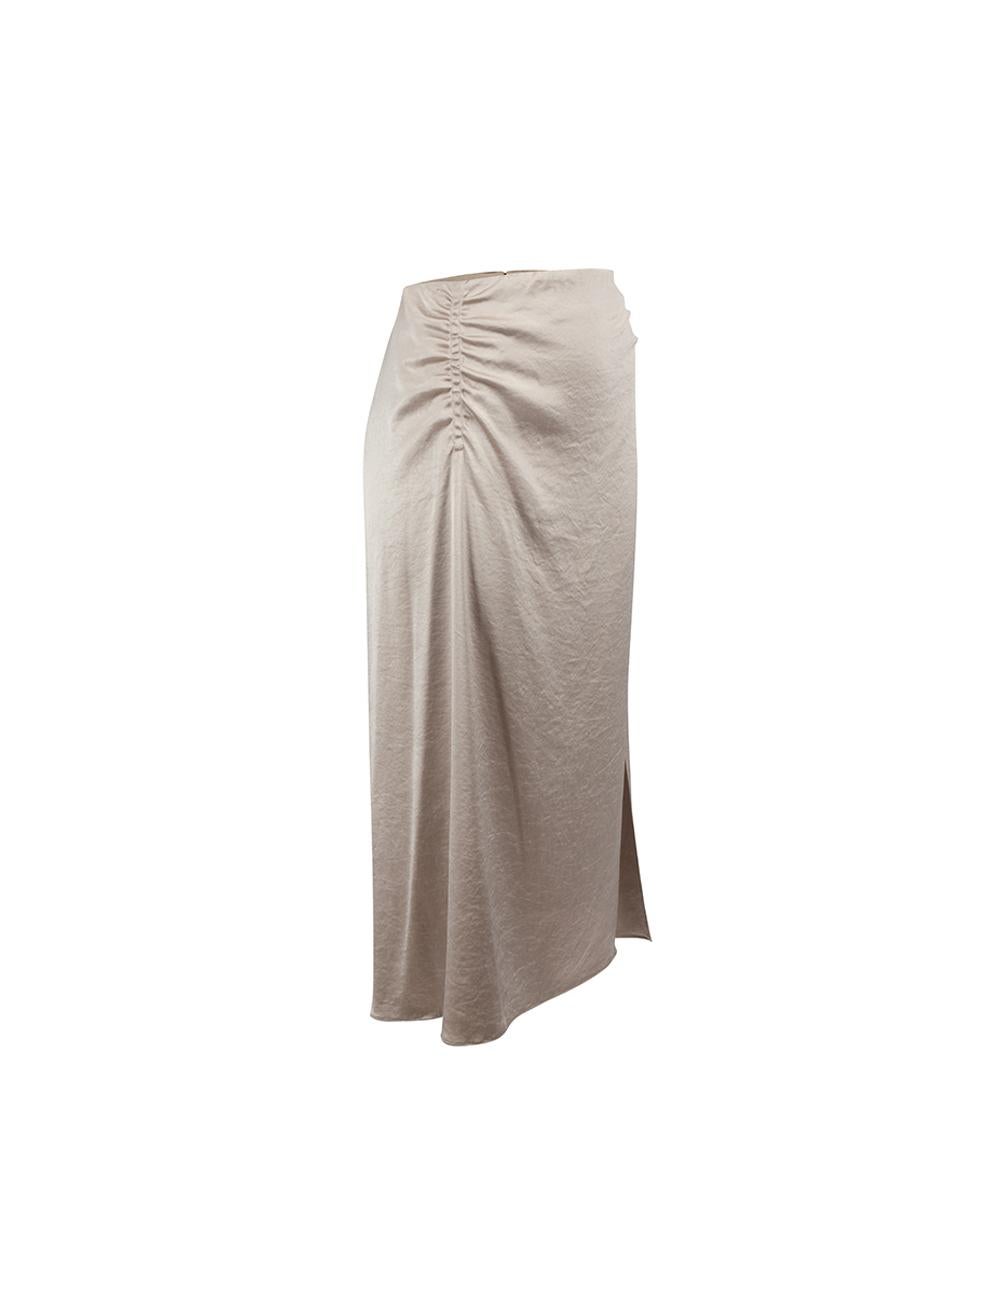 CONDITION is Never worn, with tags. No visible wear to skirt is evident on this new Elie Tahari designer resale item. 



Details


Beige

Synthetic

Knee length skirt

Side slit

Ruched accent

Back zip closure with hook and eye





Made in